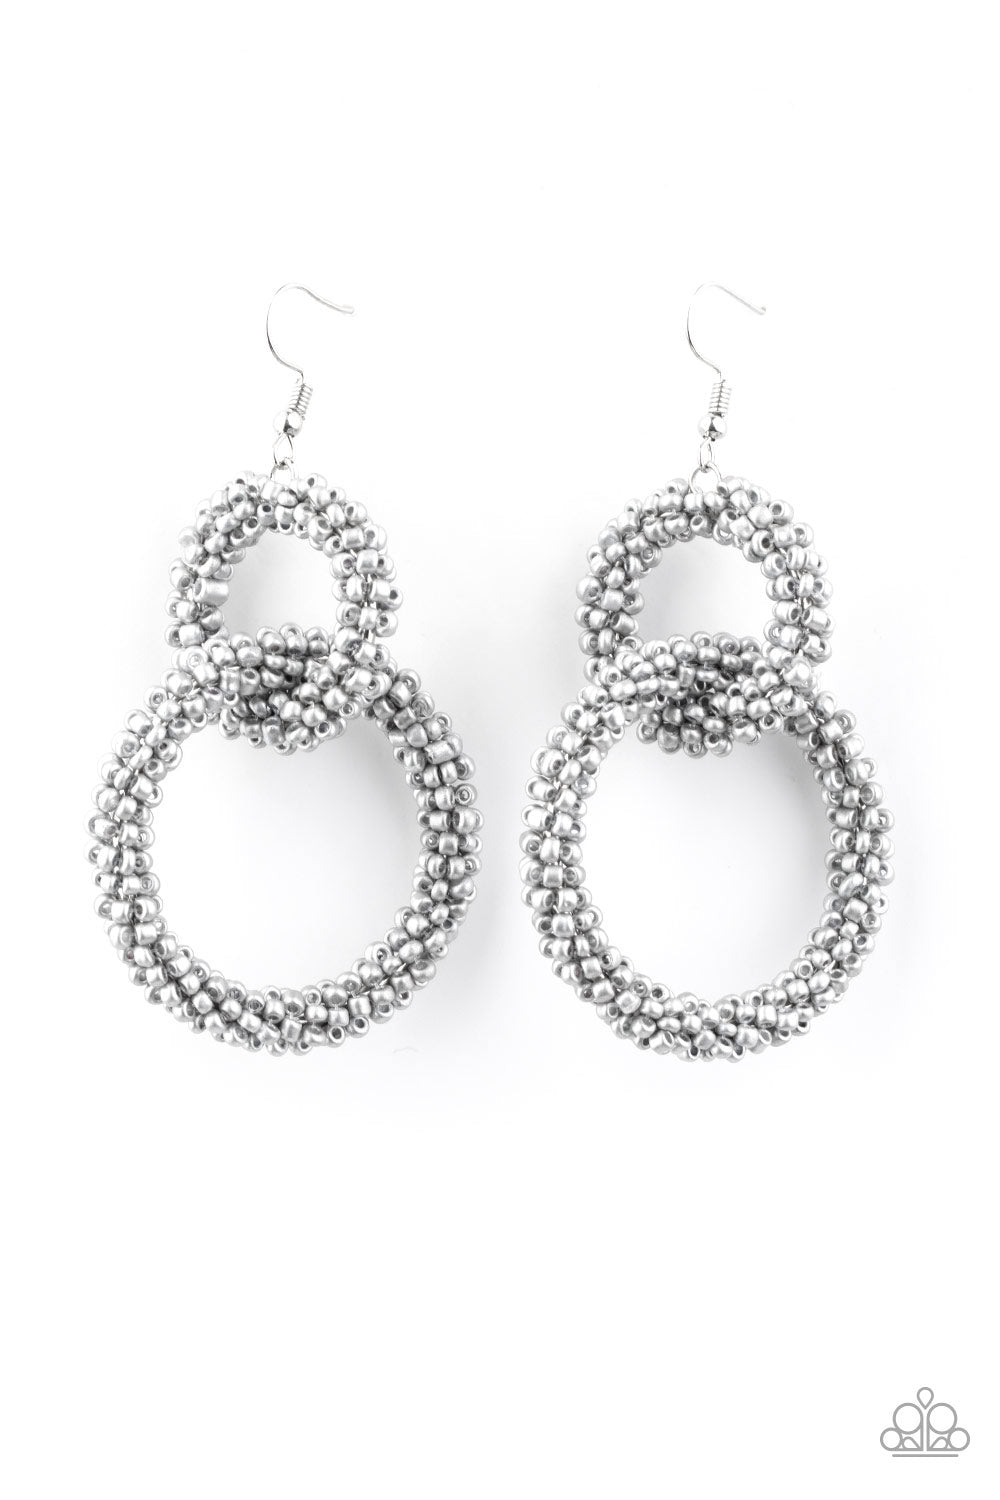 Luck BEAD a Lady Silver
Earrings Paparazzi